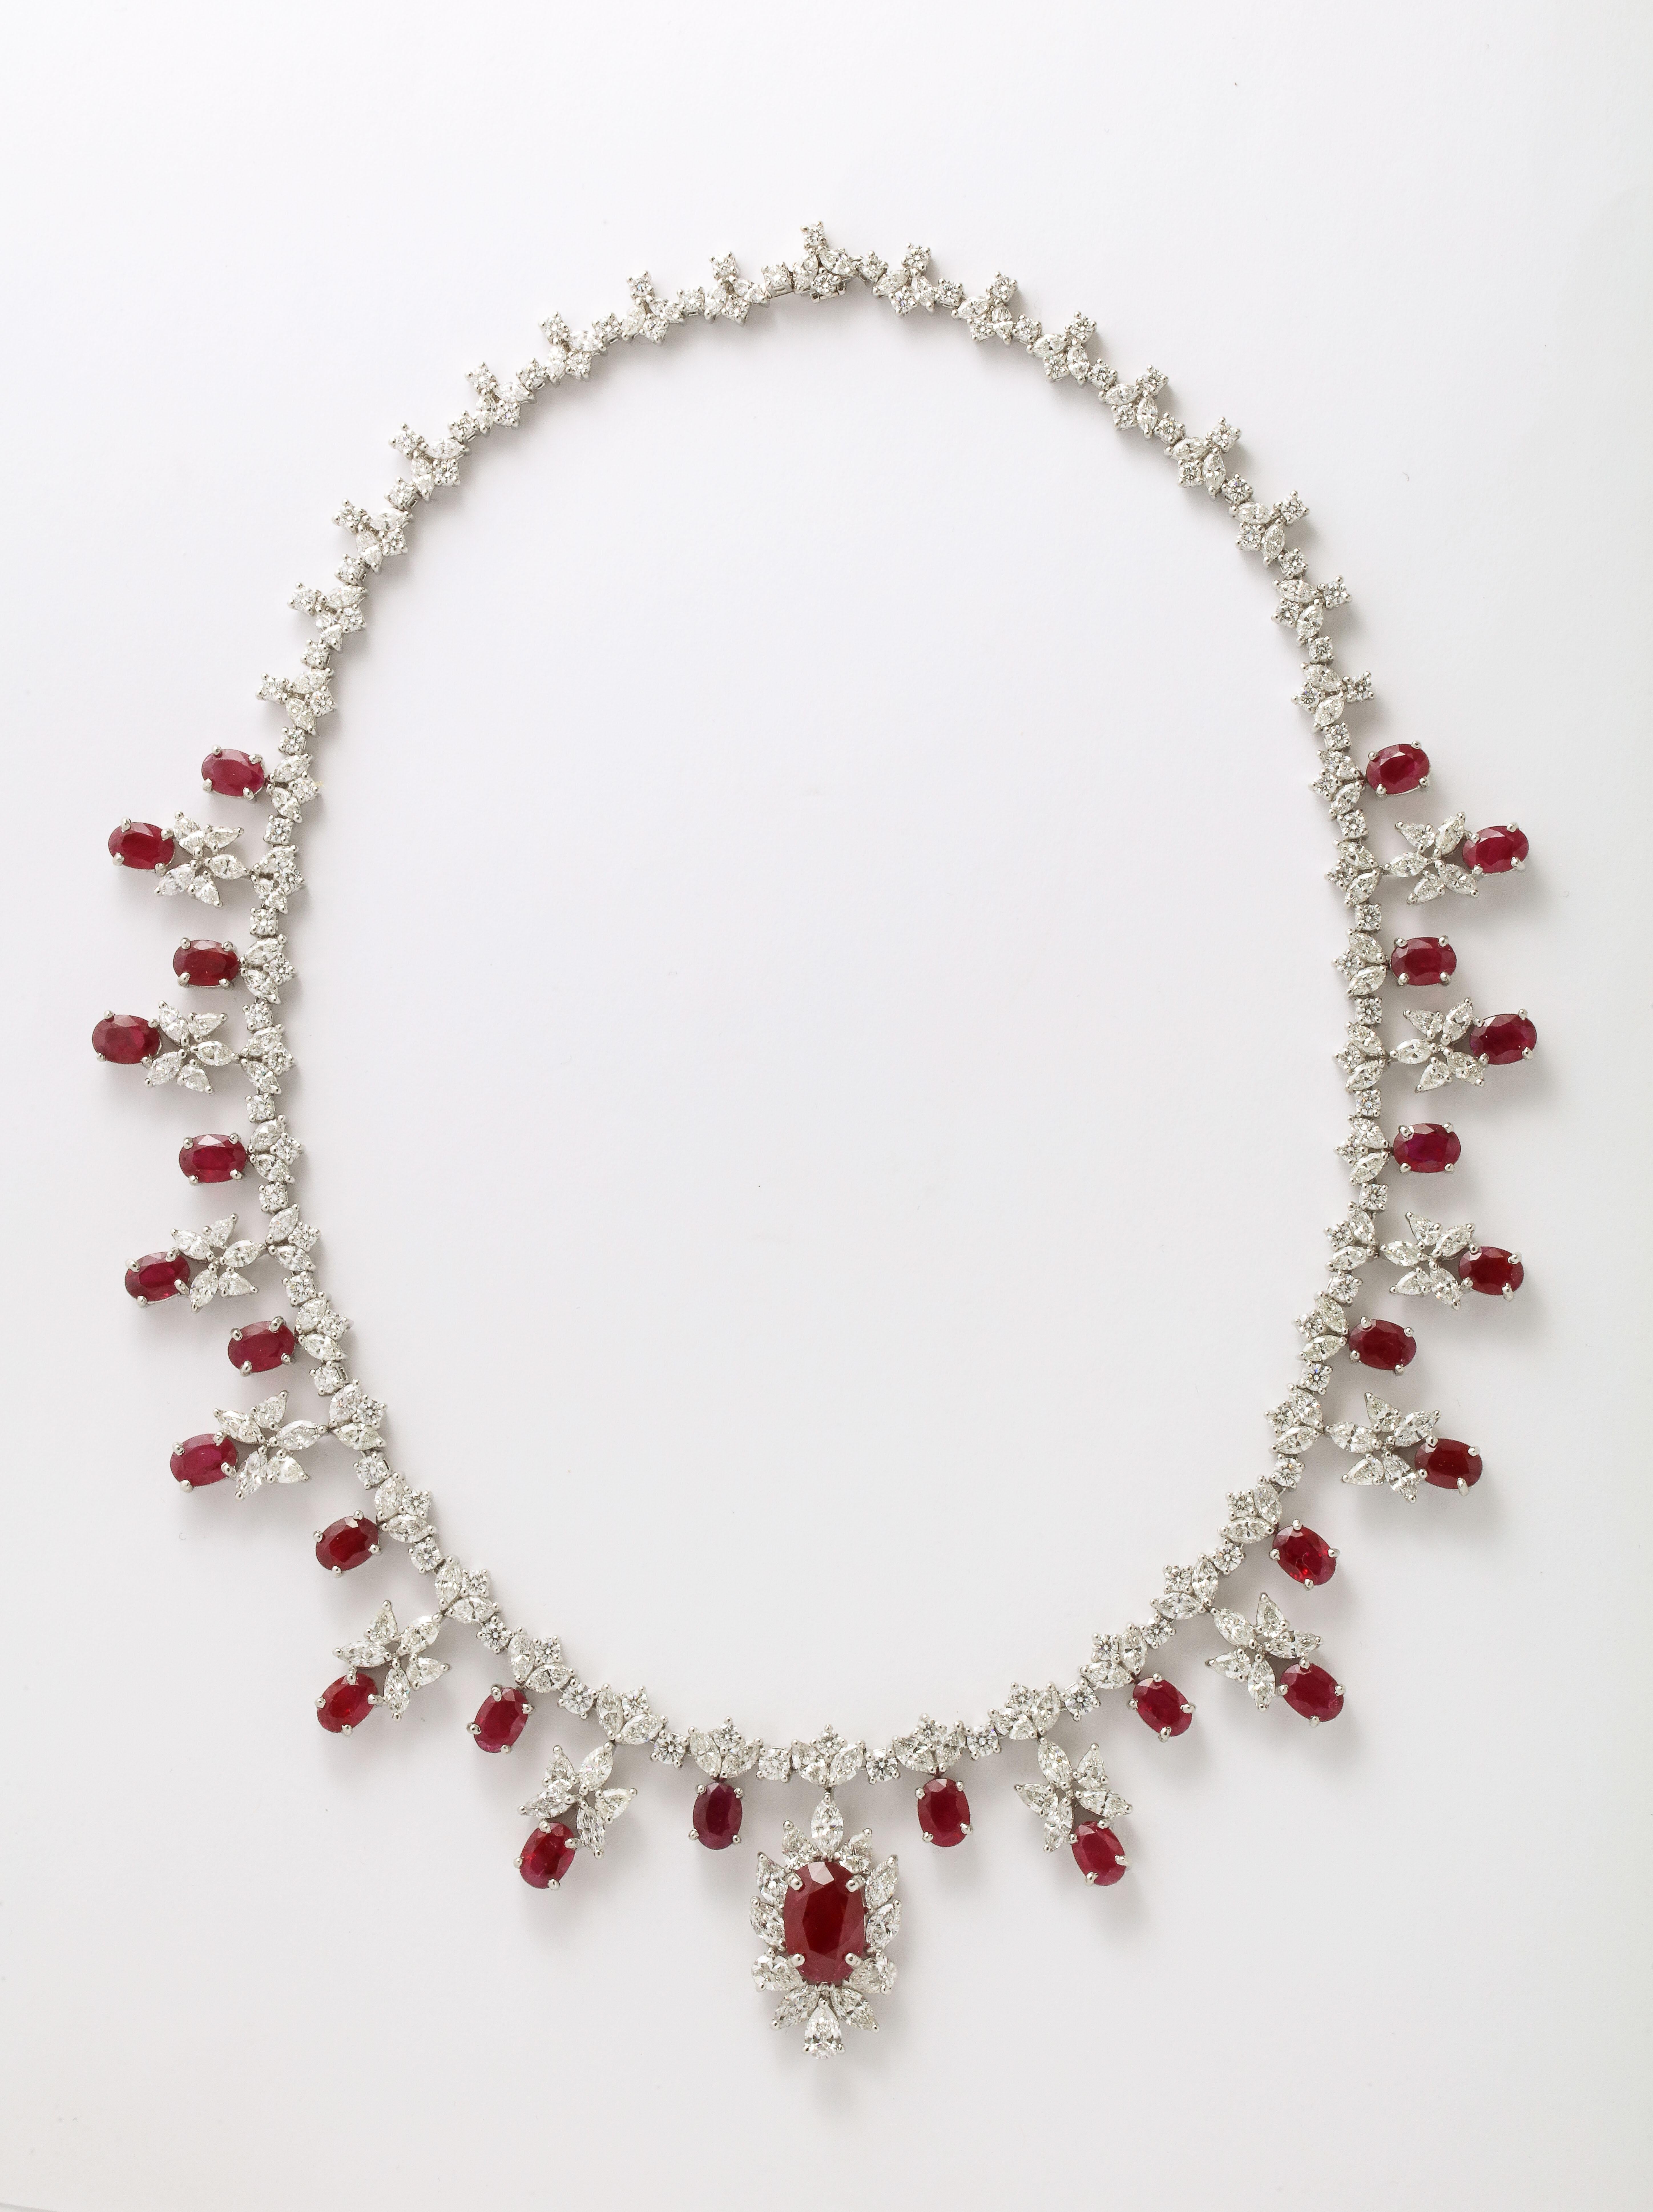 
An exceptional piece! 

34.83 carats of Fine Burma Ruby 

29.30 carats of white round, pear and marquise cut diamonds. 

Set in platinum 

17 inch length 

Certified by Christian Dunaigre of Switzerland. The certificate is available on request for